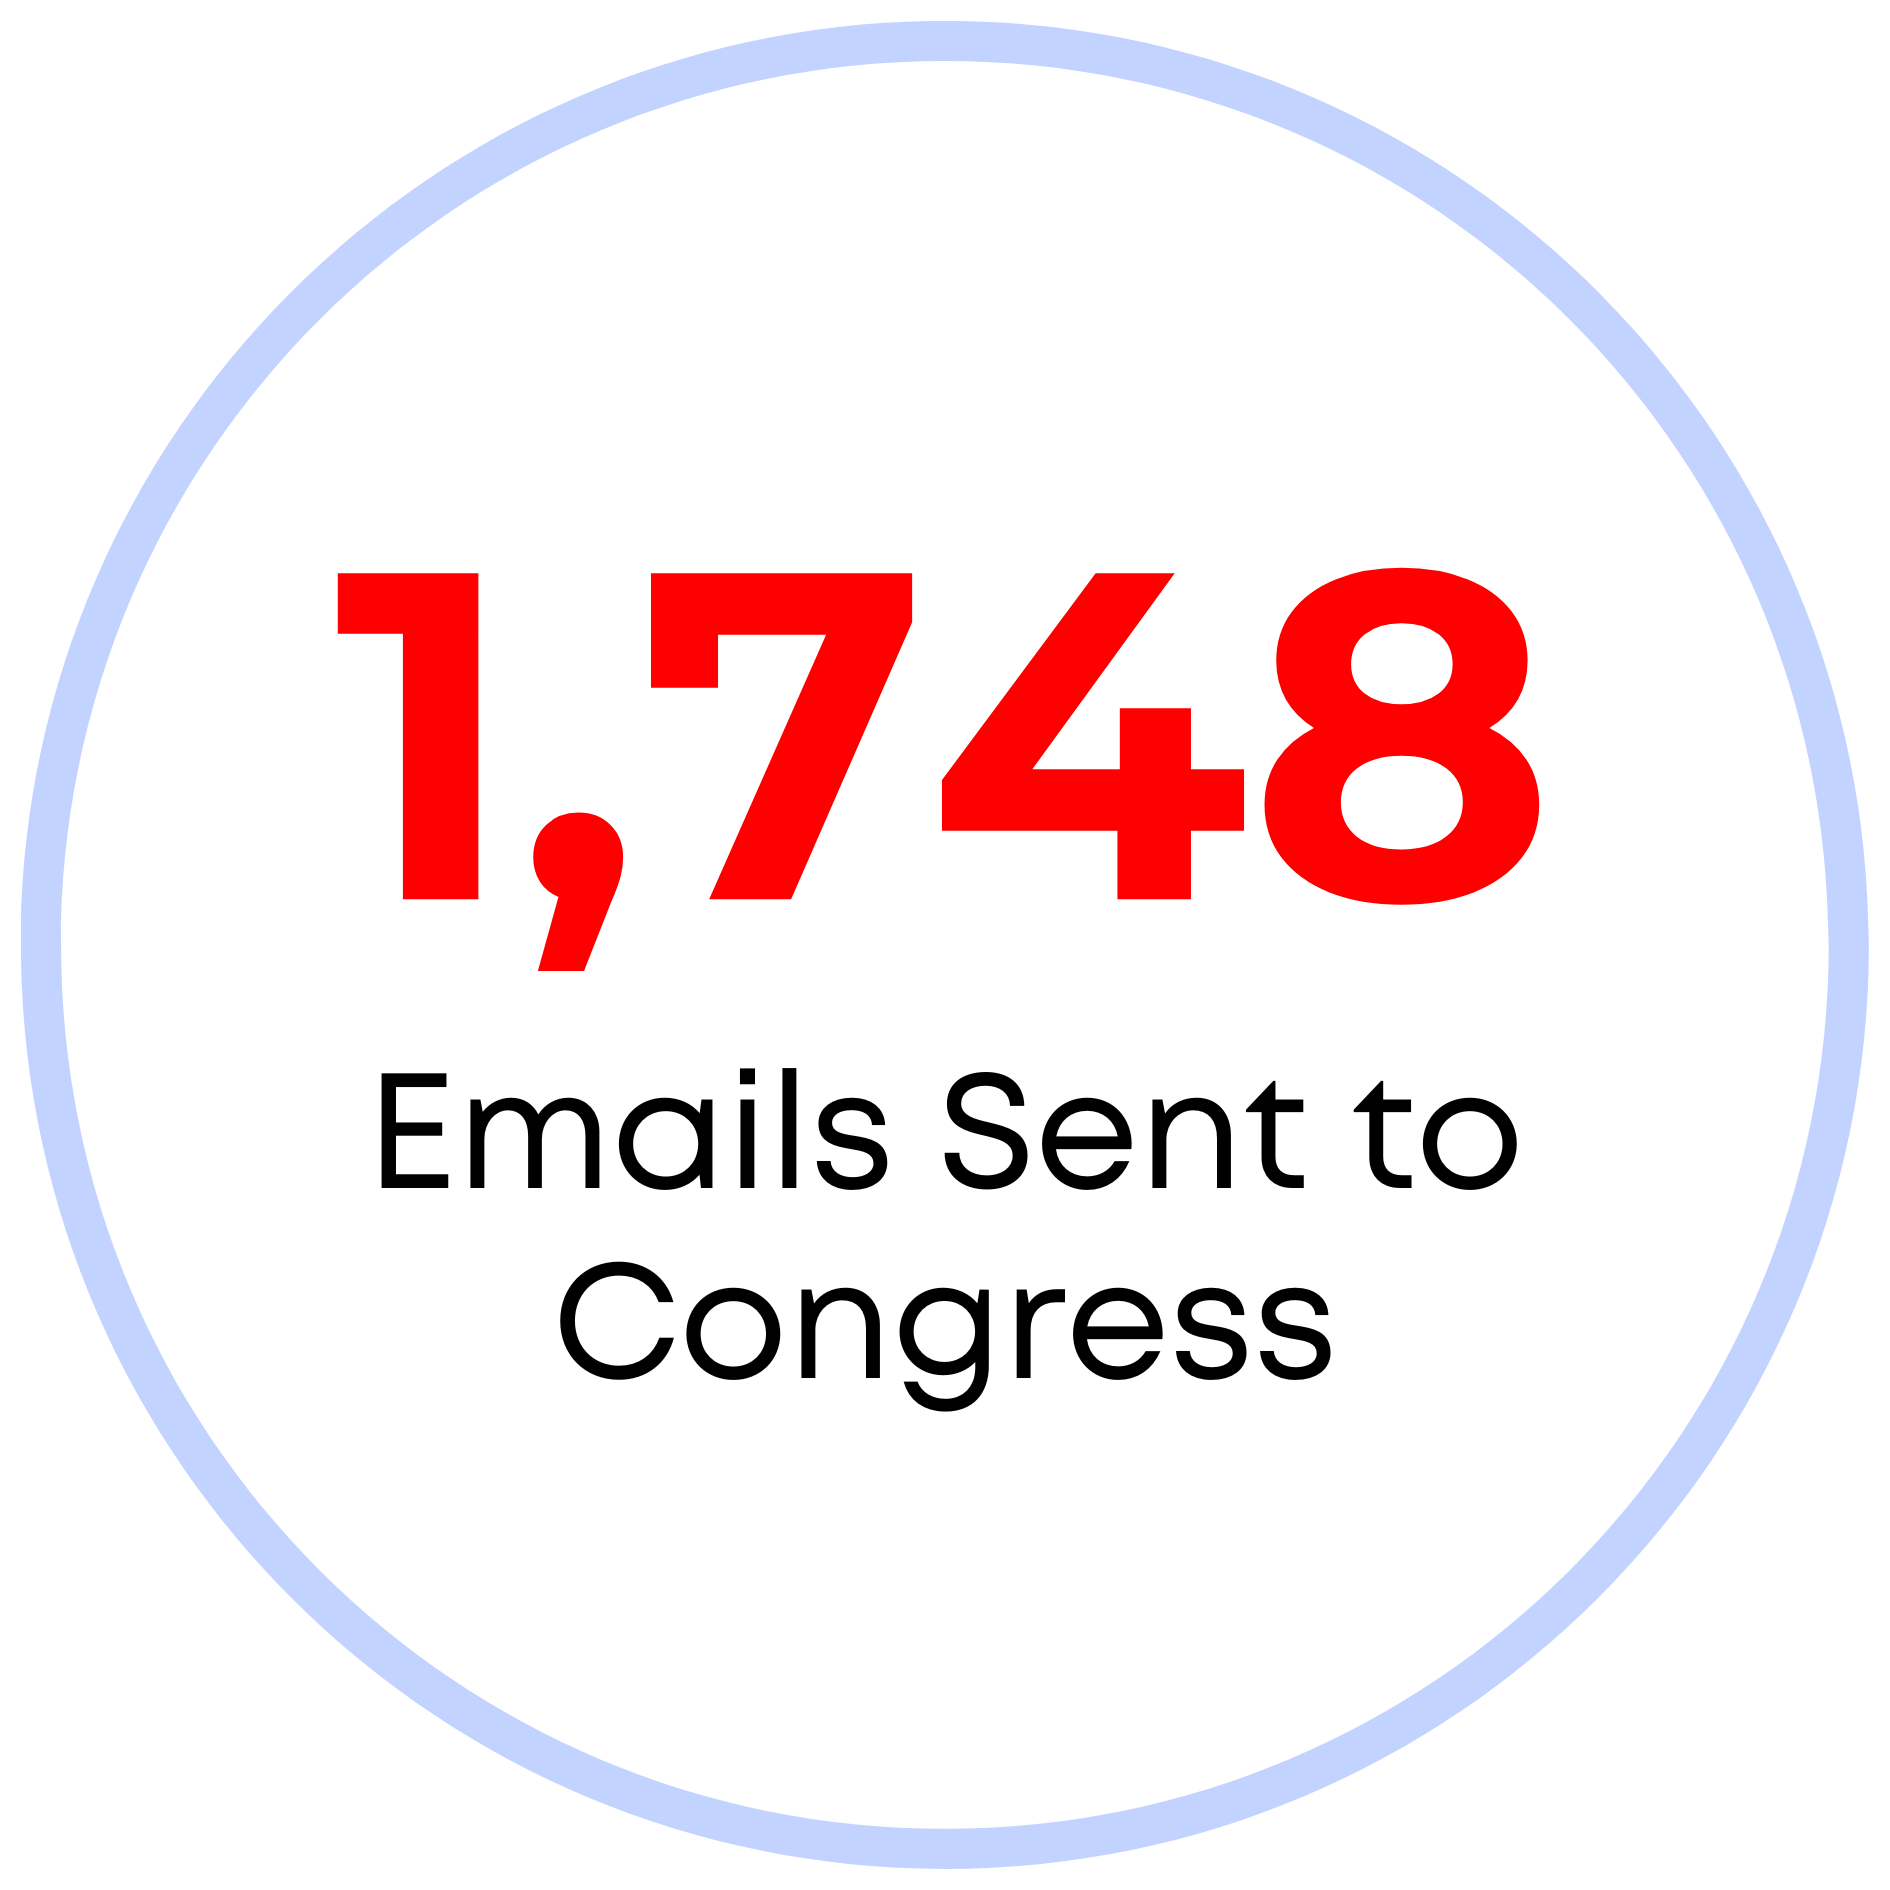 1,748 Emails to Congress